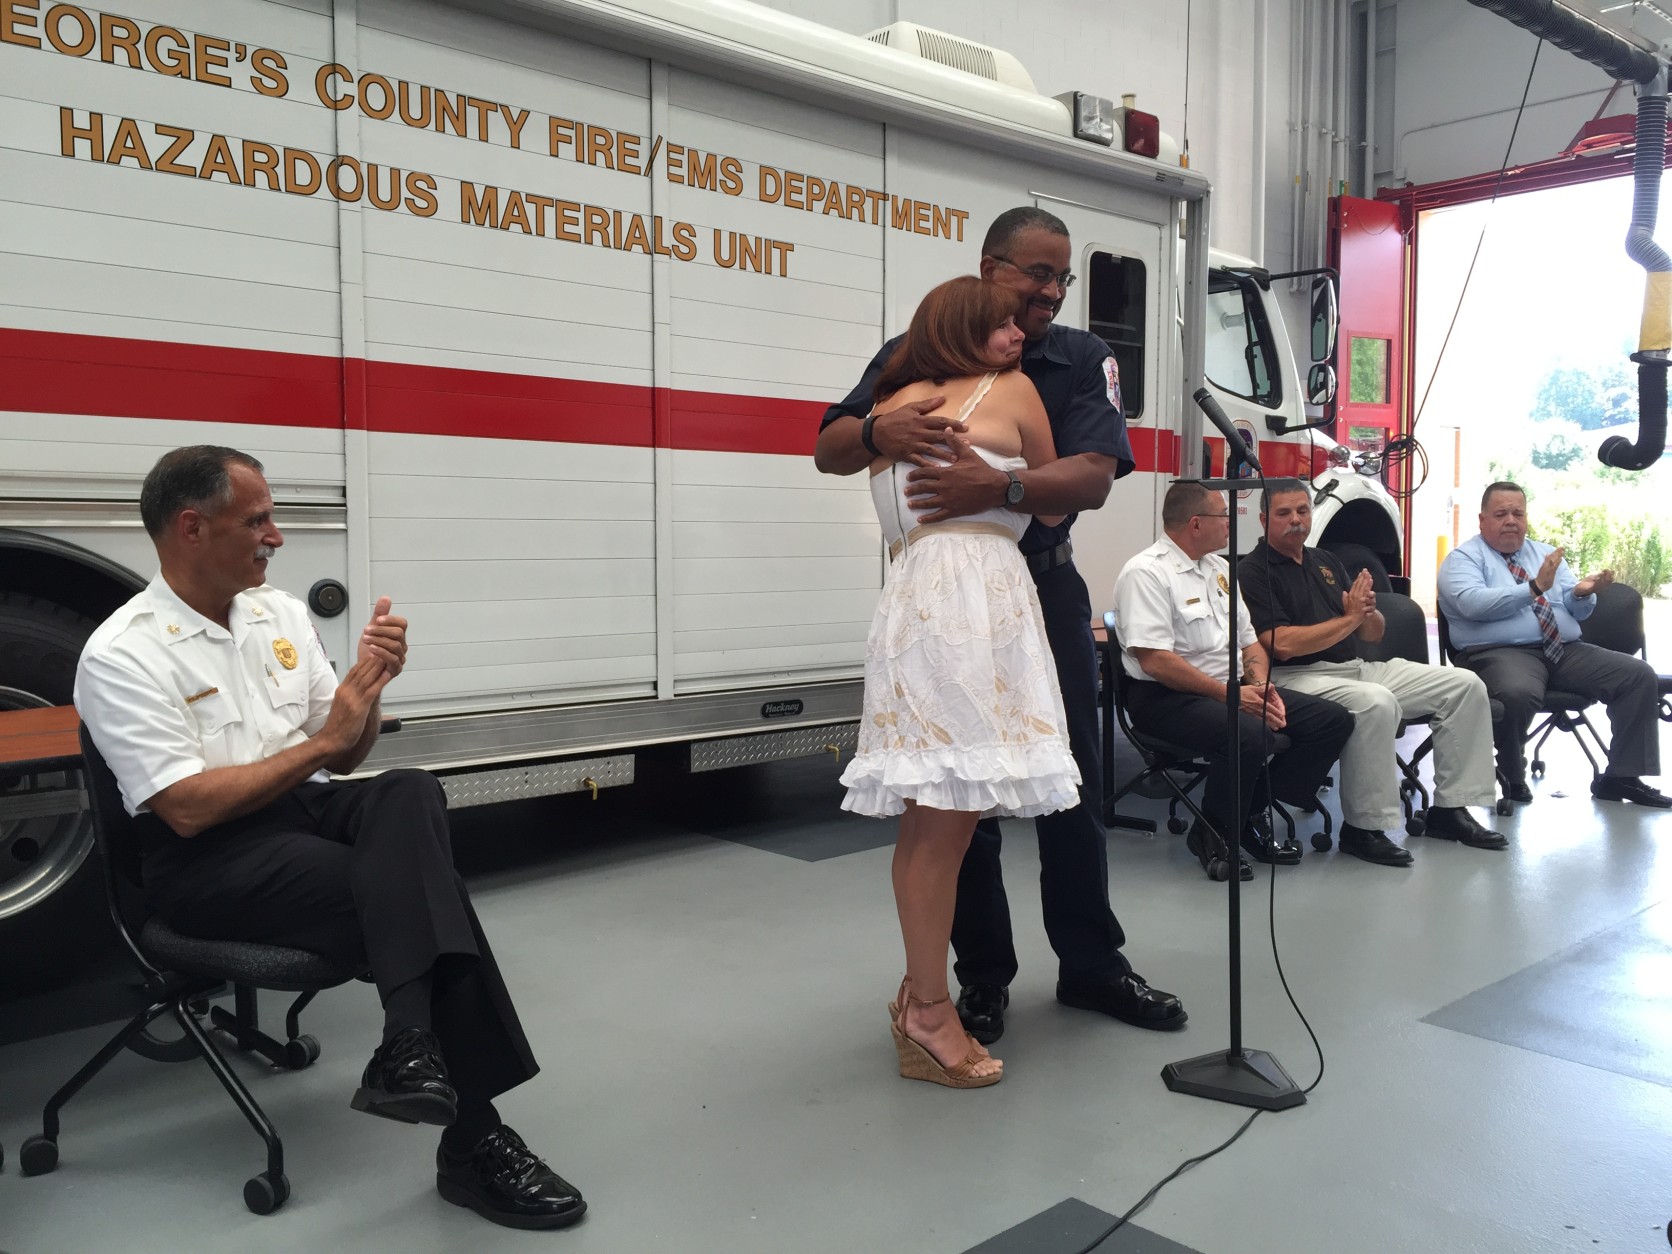 Prince George's County fireman Melvin Batts cut the seatbelt off Lisa Beavers Hegewisch and helped get her to the hospital. (WTOP/Michelle Basch)